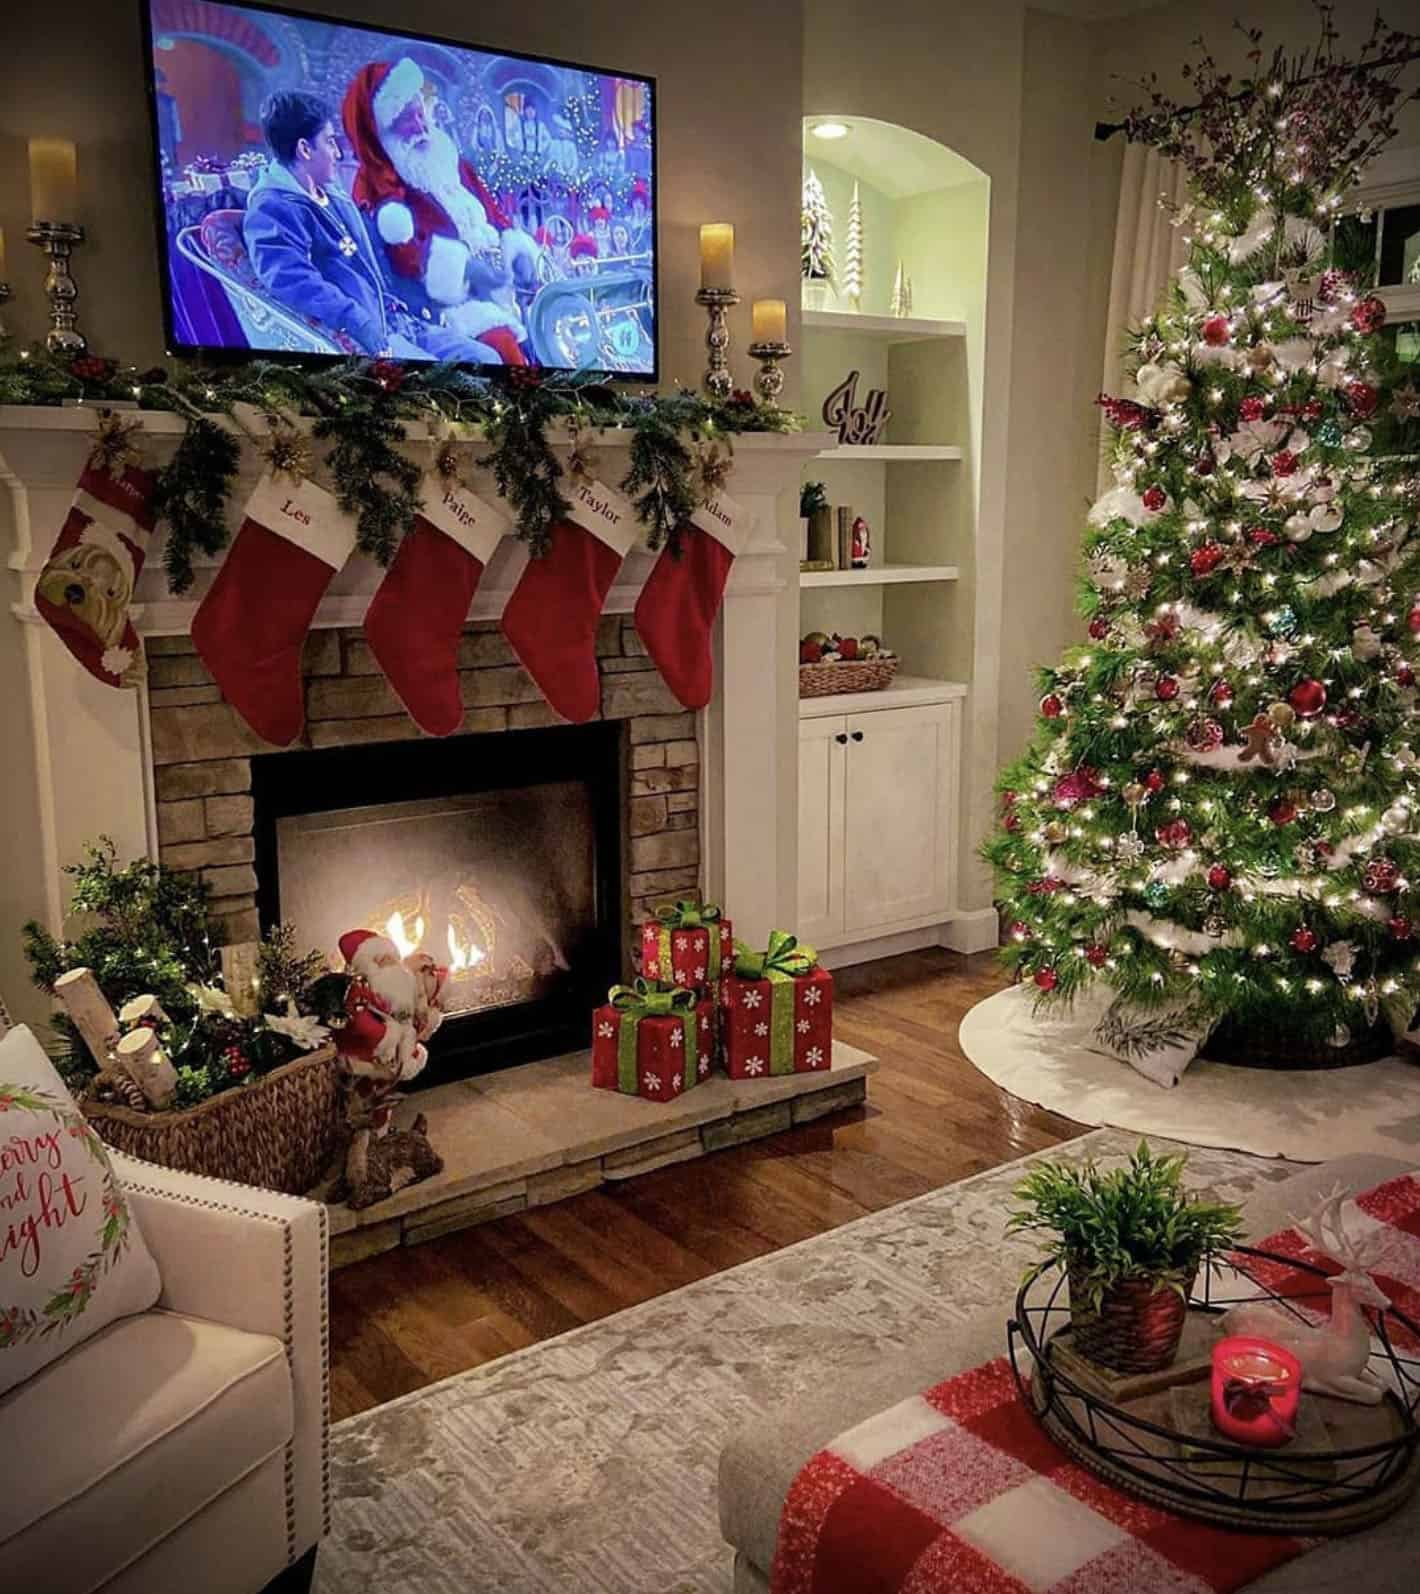 cozy-christmas-decorated-living-room-in-a-red-white-and-green-color-scheme